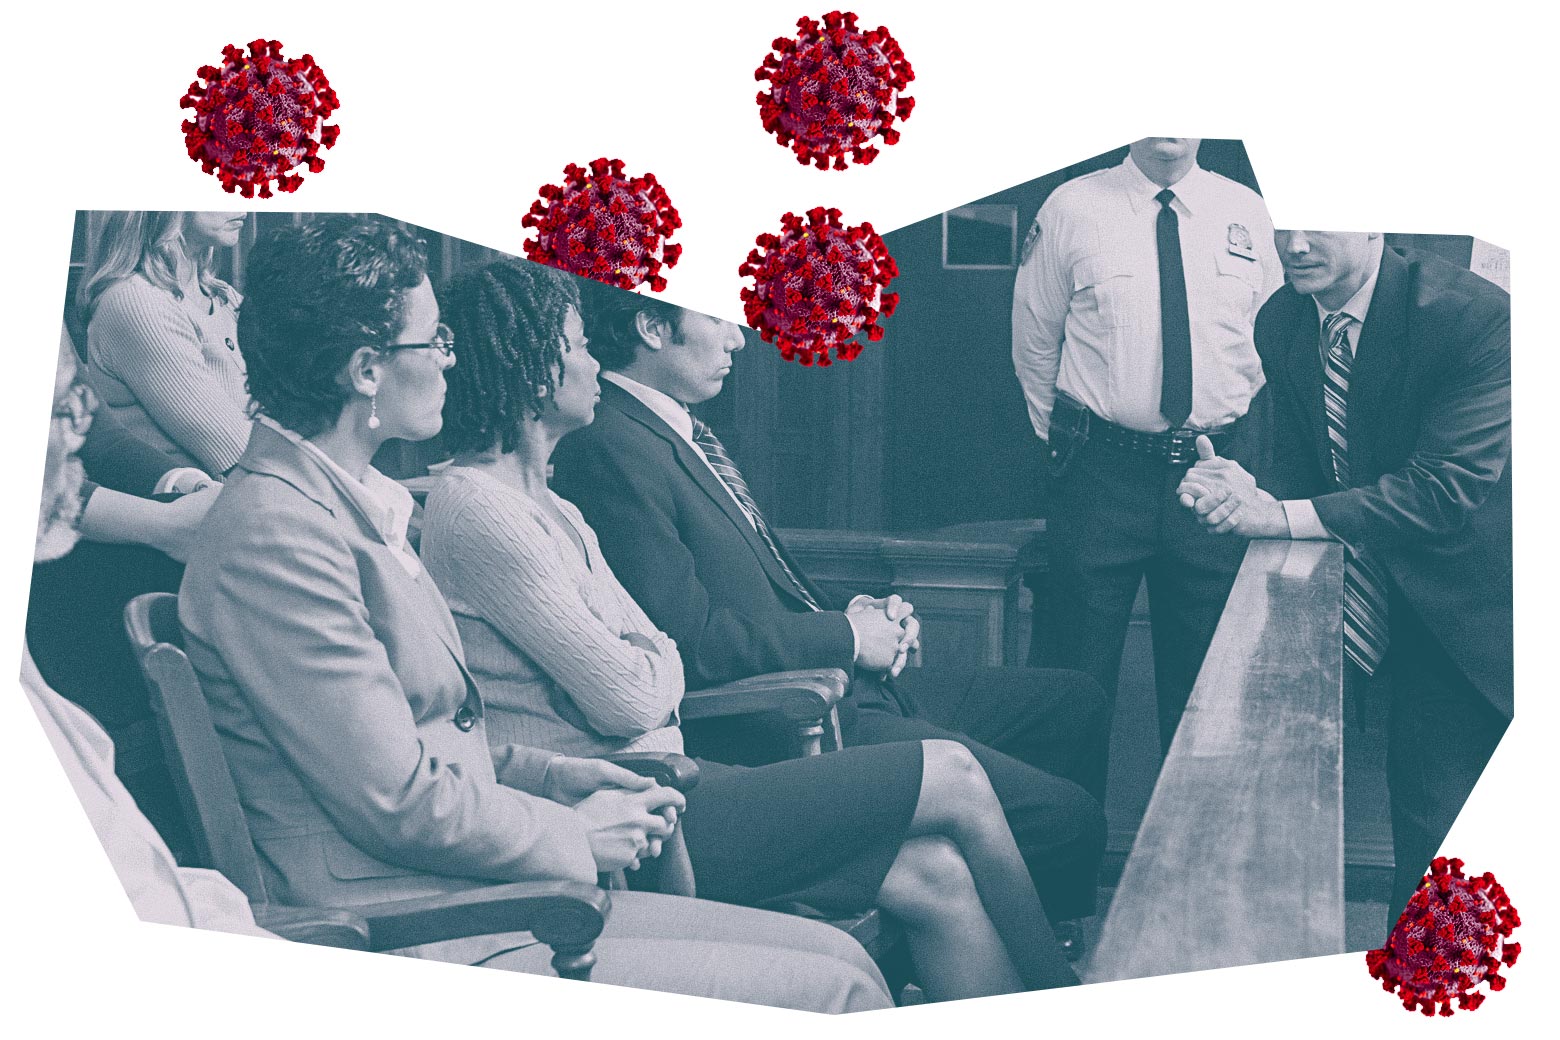 Coronavirus cells are seen floating around an image of people in a courtroom.